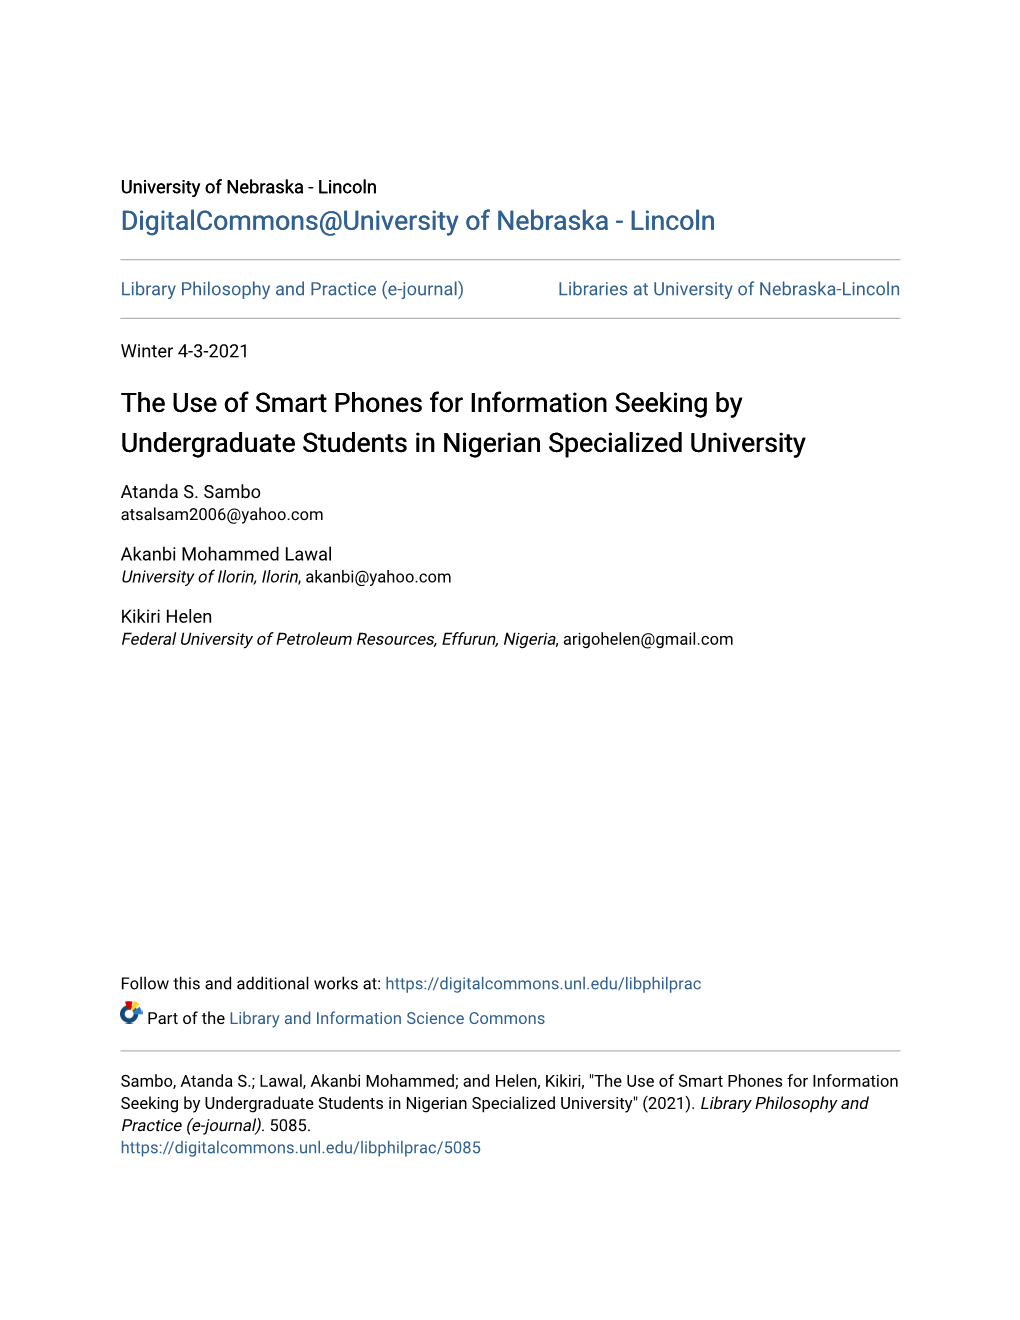 The Use of Smart Phones for Information Seeking by Undergraduate Students in Nigerian Specialized University